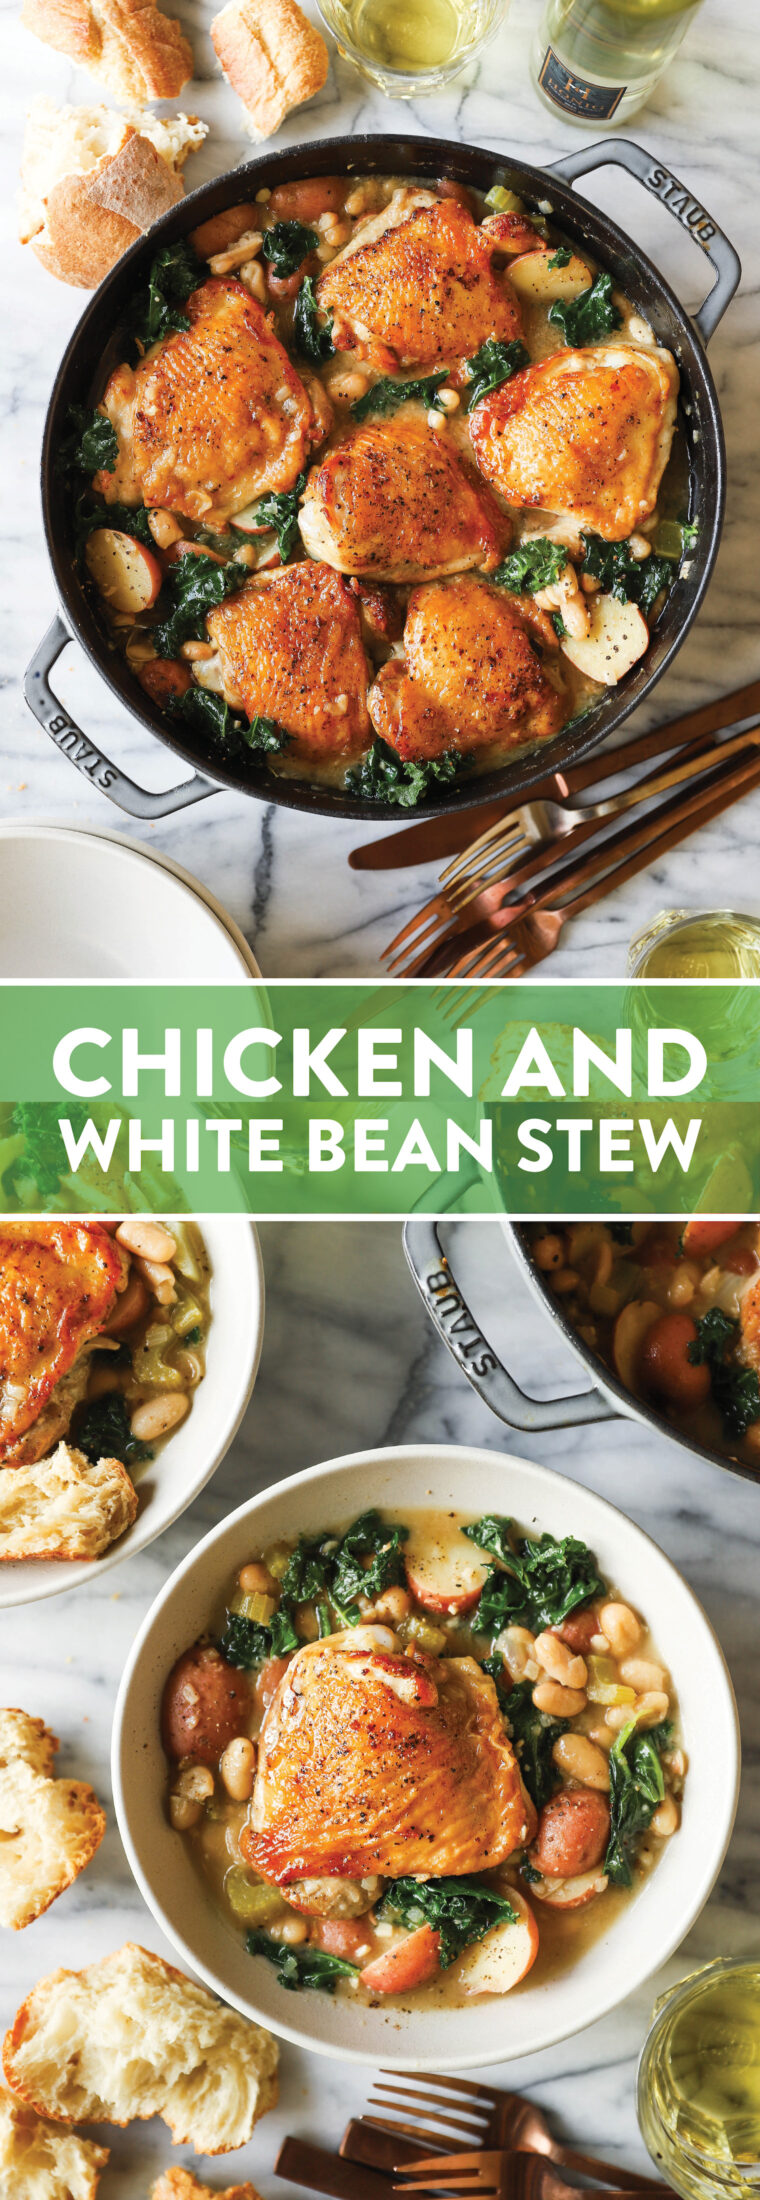 Chicken and White Bean Stew - Chockfull of chicken, white beans, potatoes and kale! Serve with a salad and crusty bread. SO GOOD, so cozy.